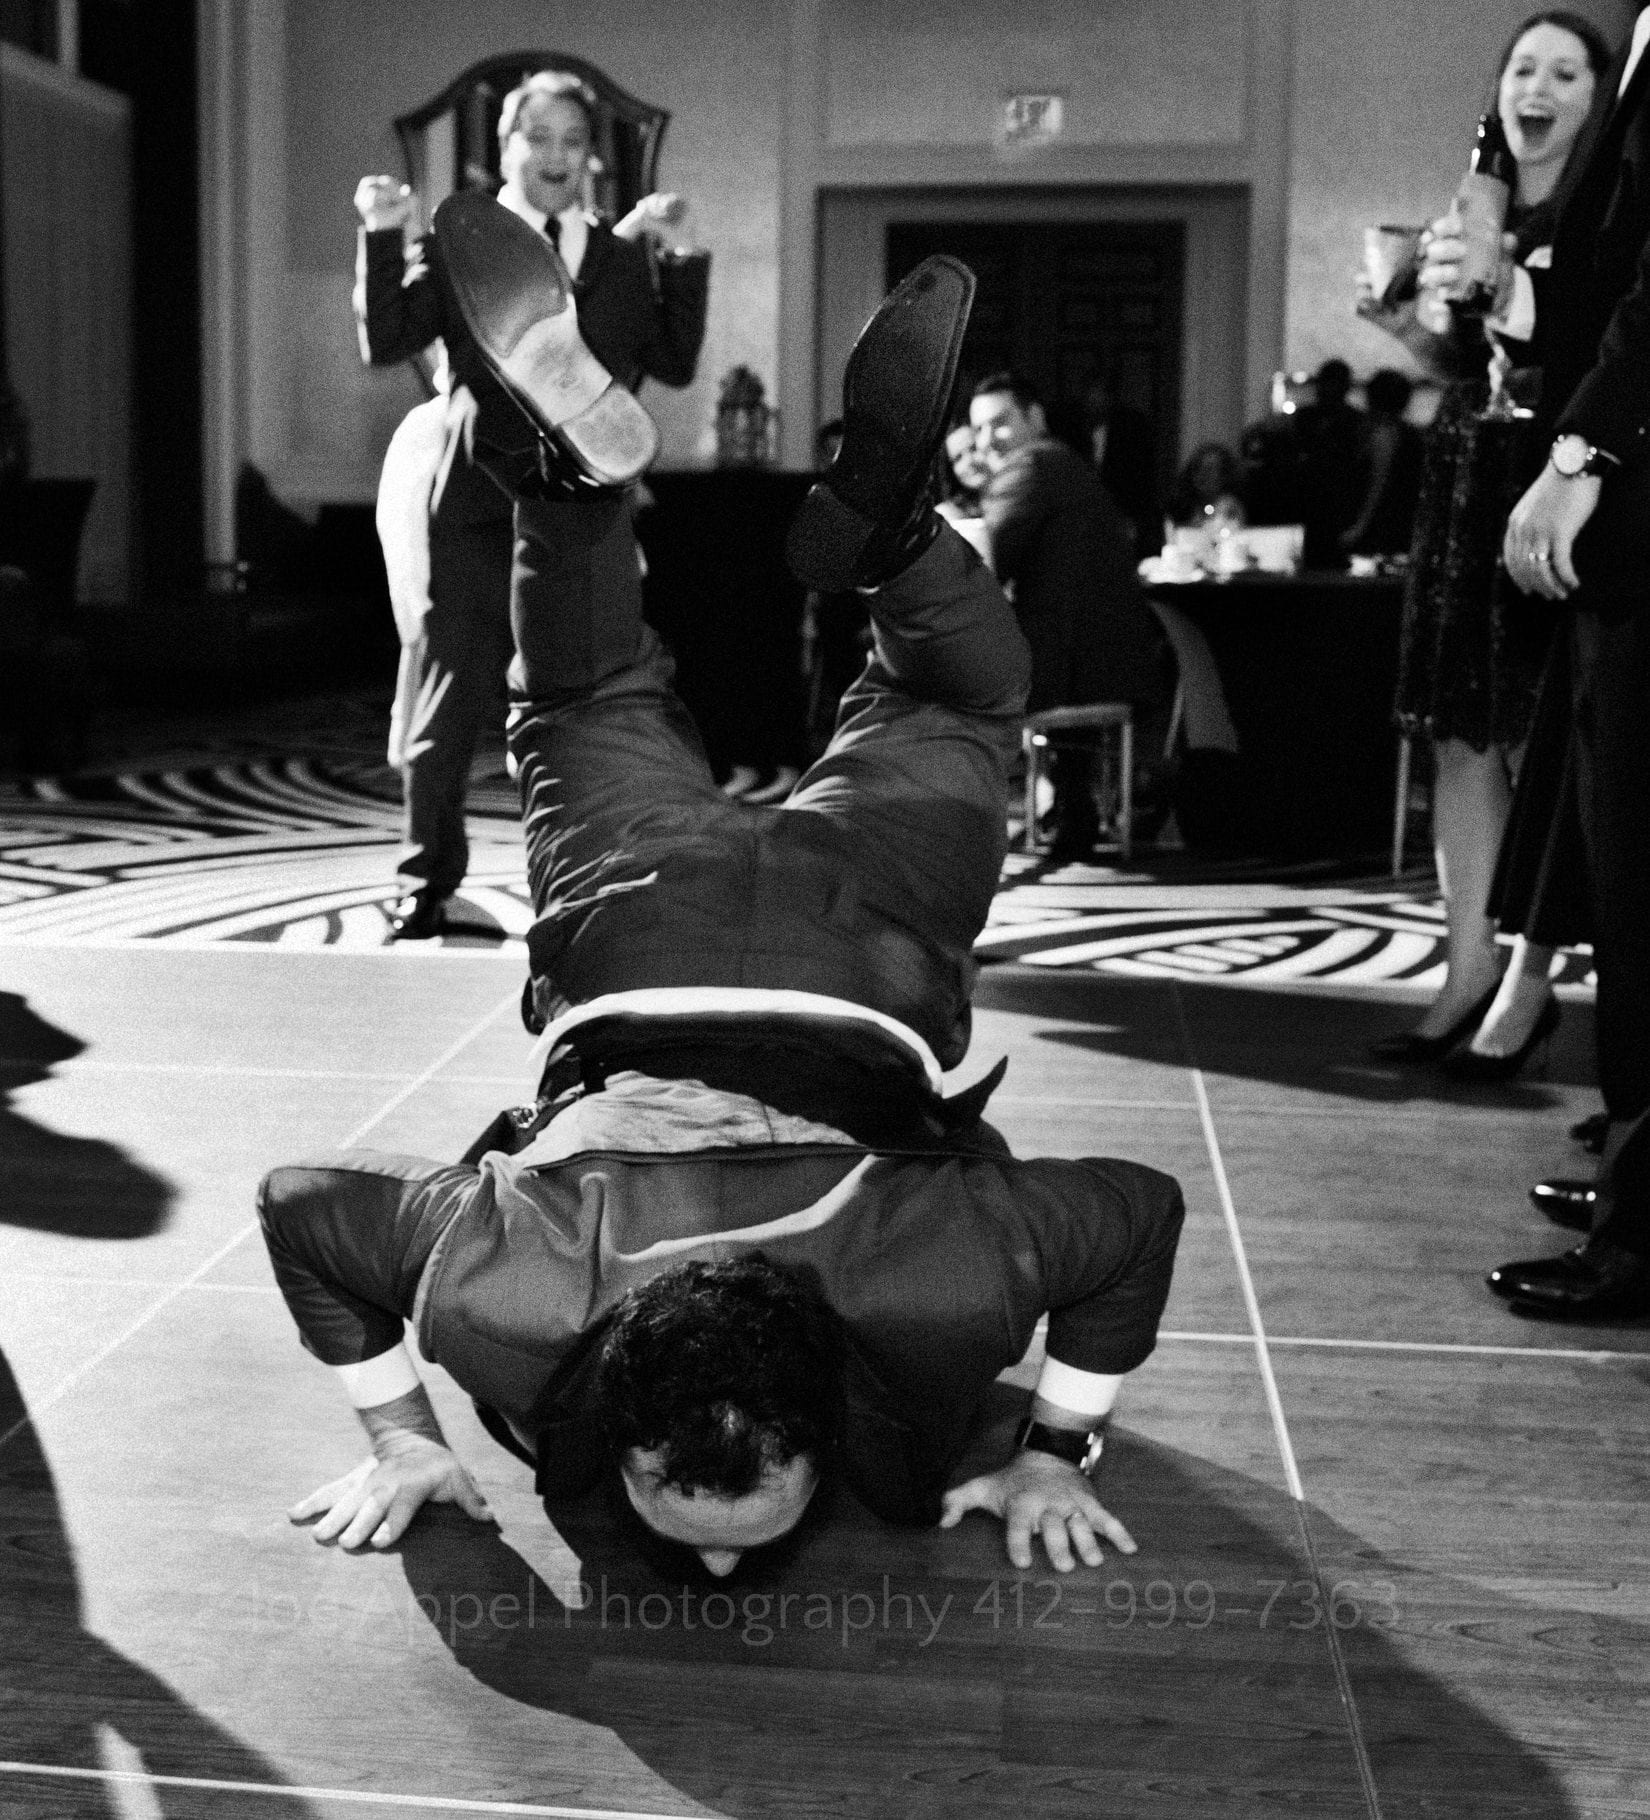 A man has his hands and face on the ground as his feet are up in the air while other guests look on and laugh at the Hotel Monaco.